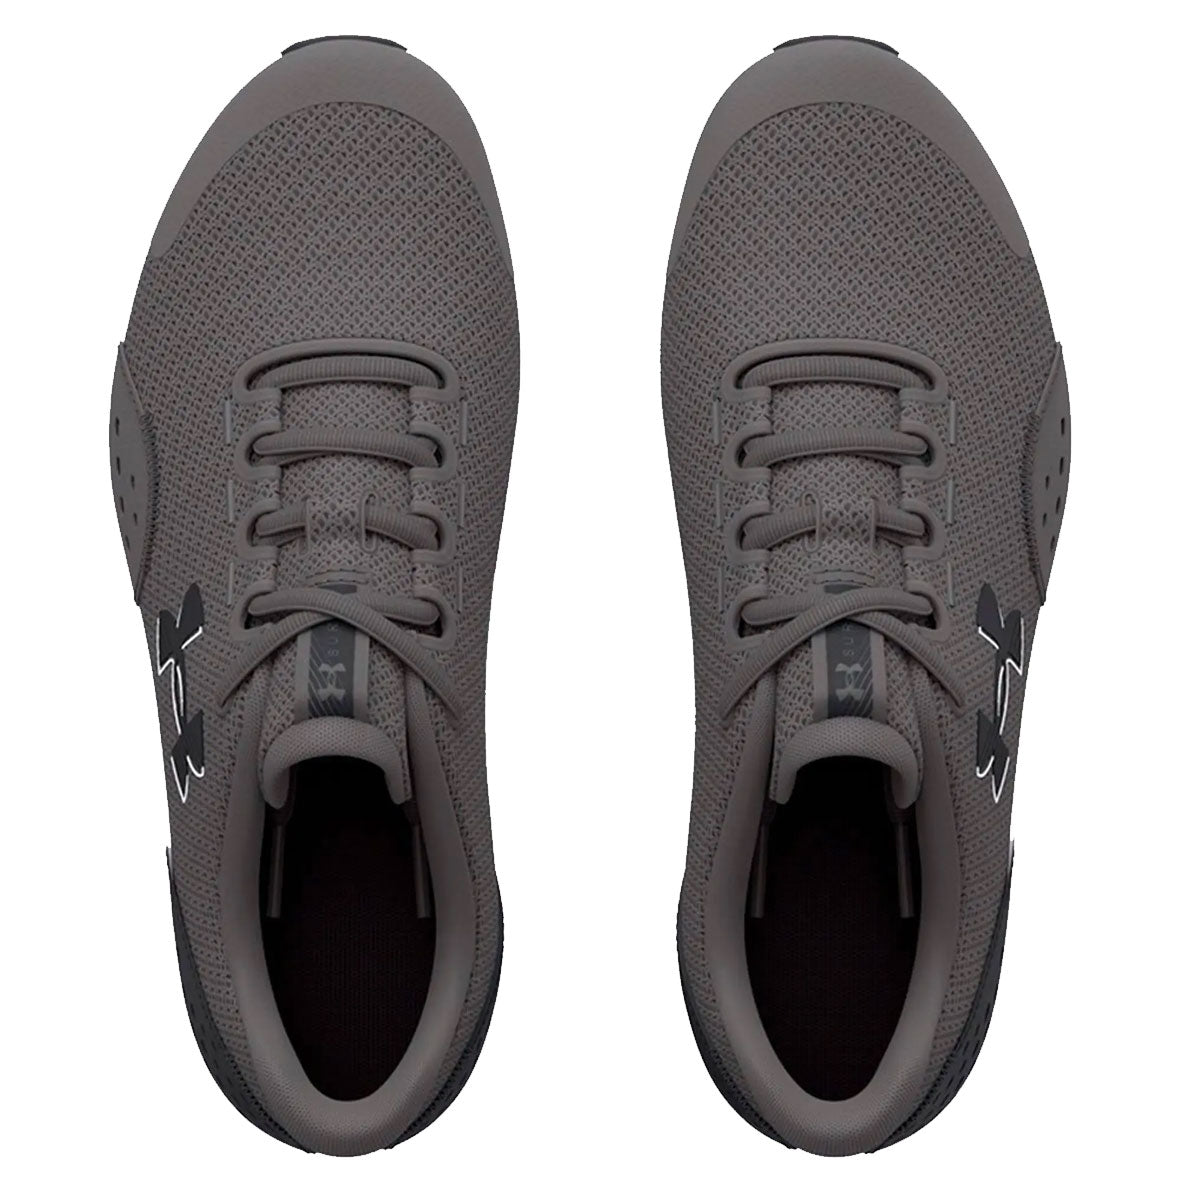 Under Armour BGS Surge 4 Running Shoes - Boys - Castlerock/Anthracite